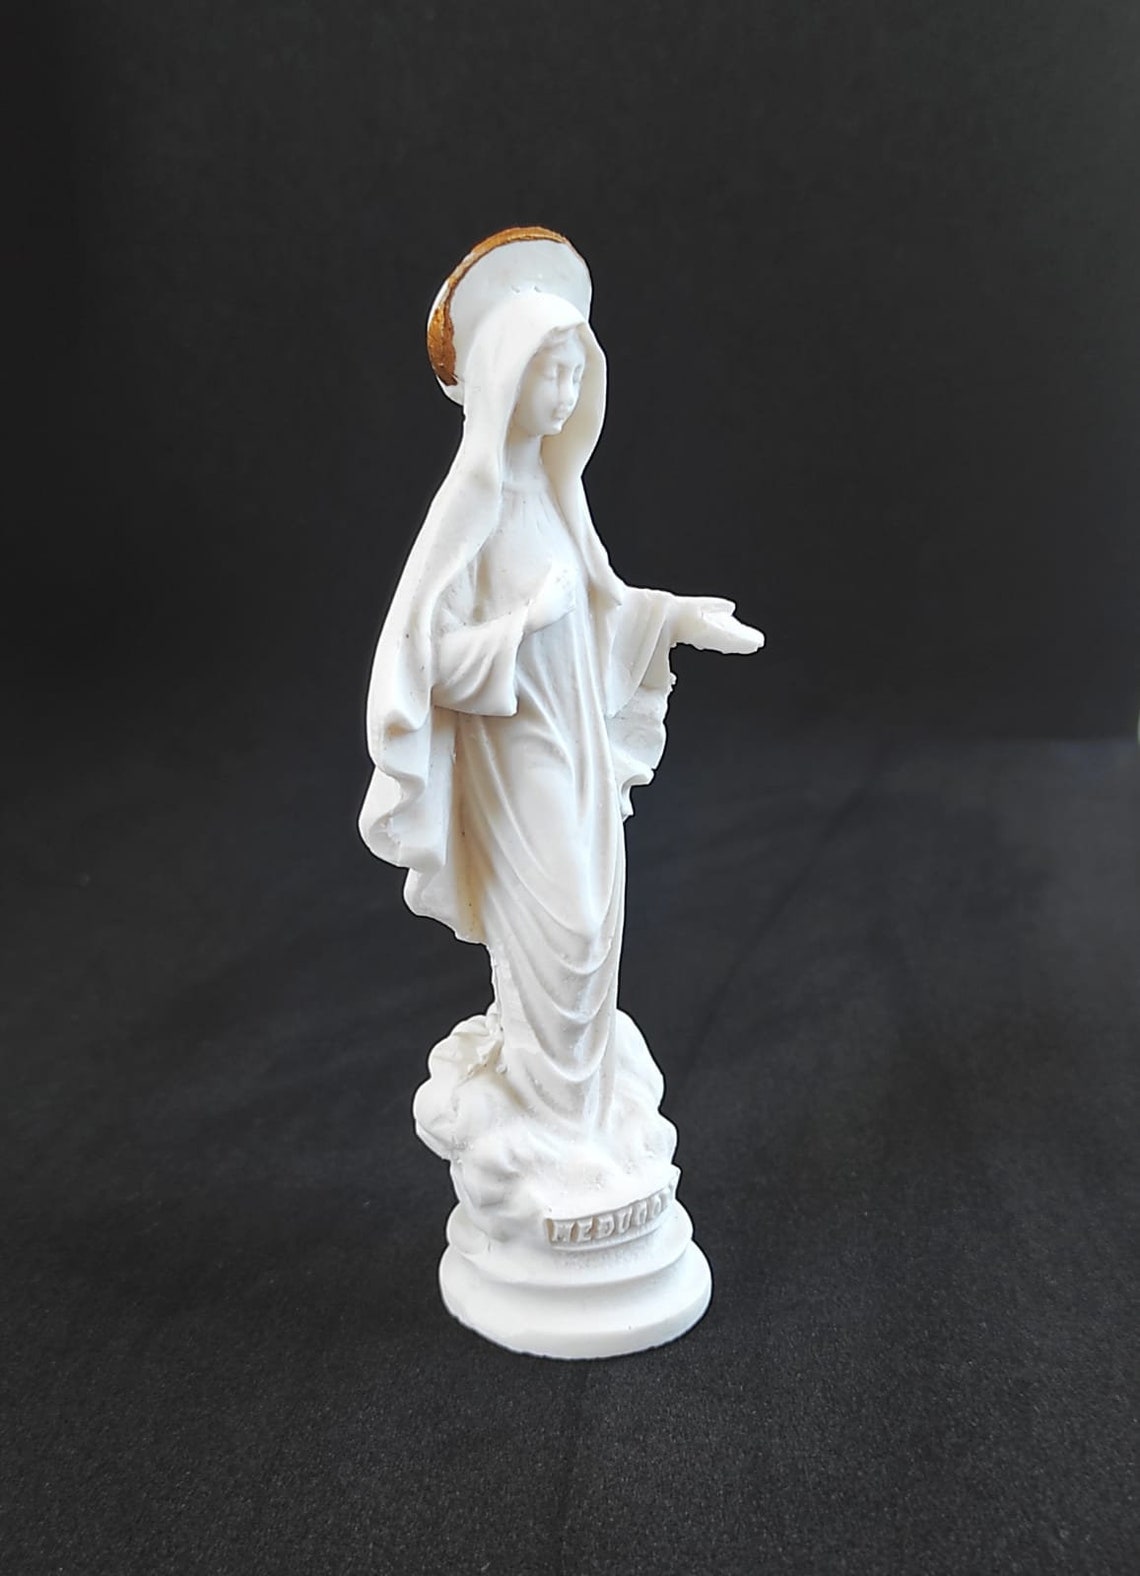 Medjugorje Statue Our Lady of Medjugorje Statue Virgin Mary - Etsy